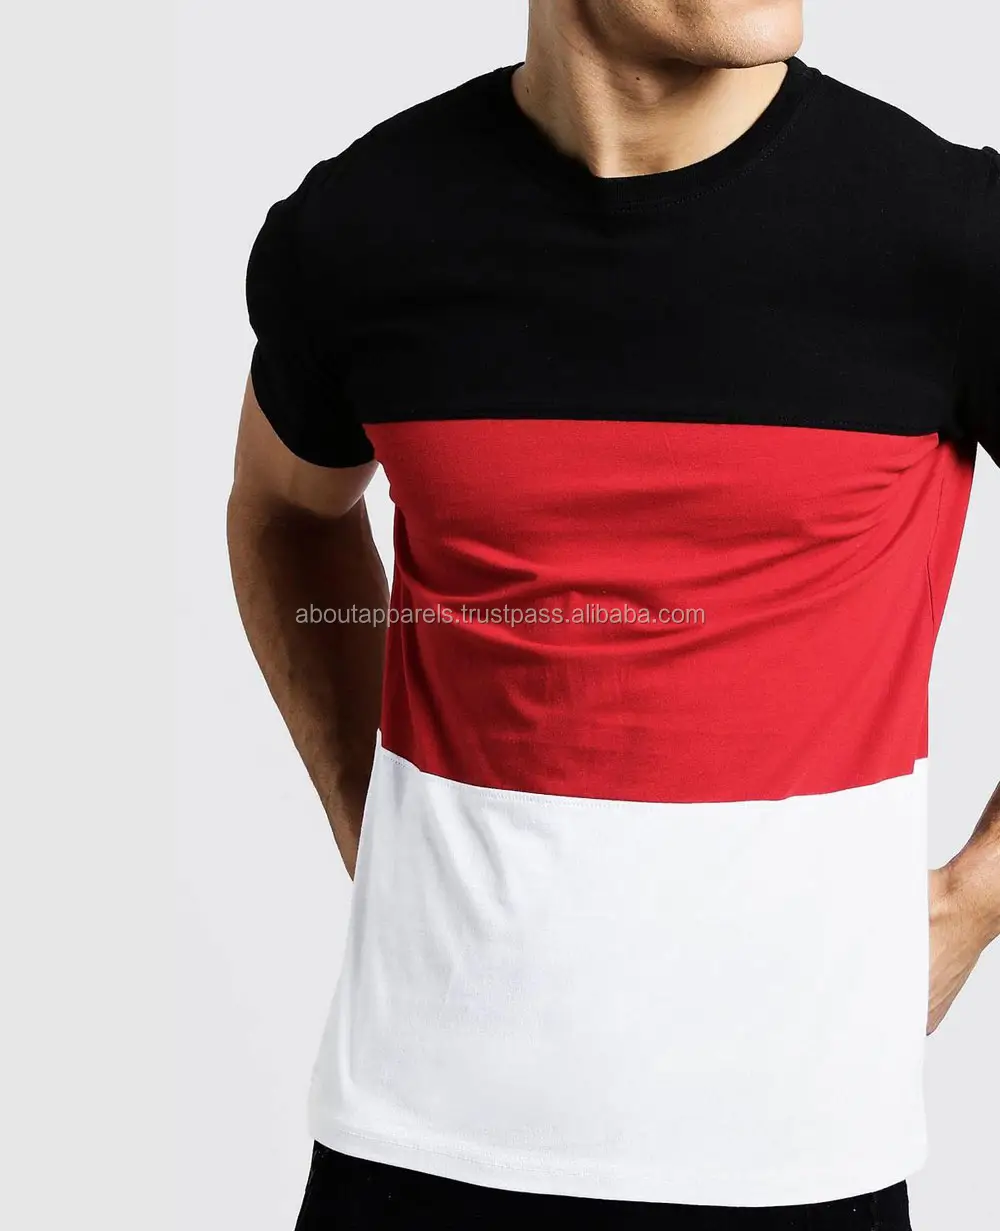 New Customized Top selling slim fit Oversize T-Shirt, New Model Designs Men'S Casual T Shirts In Bulk